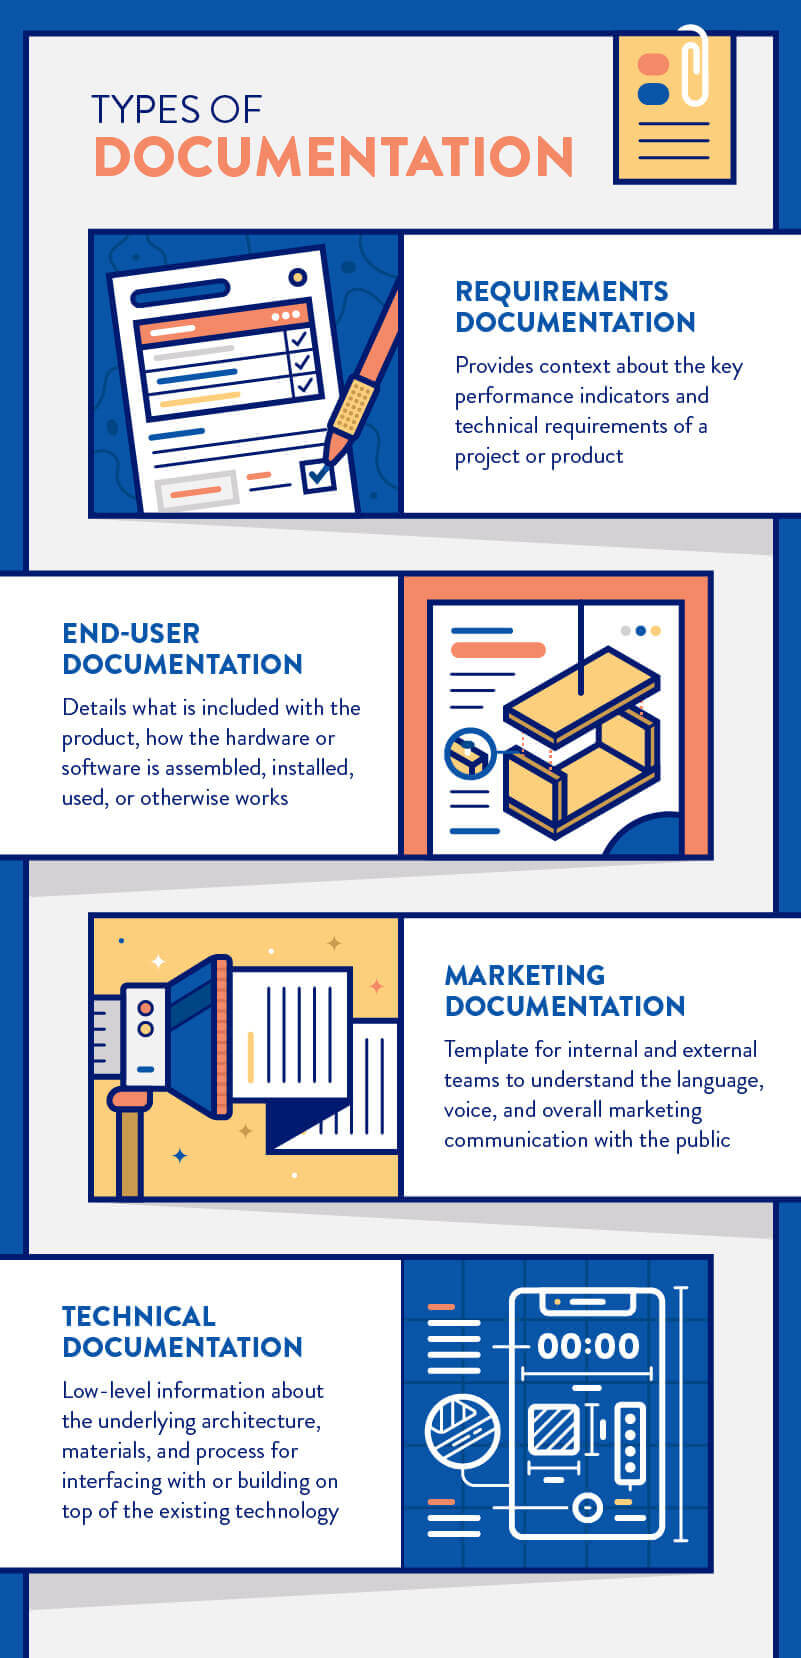 types of technical documentation including end-user, marketing, requirements document